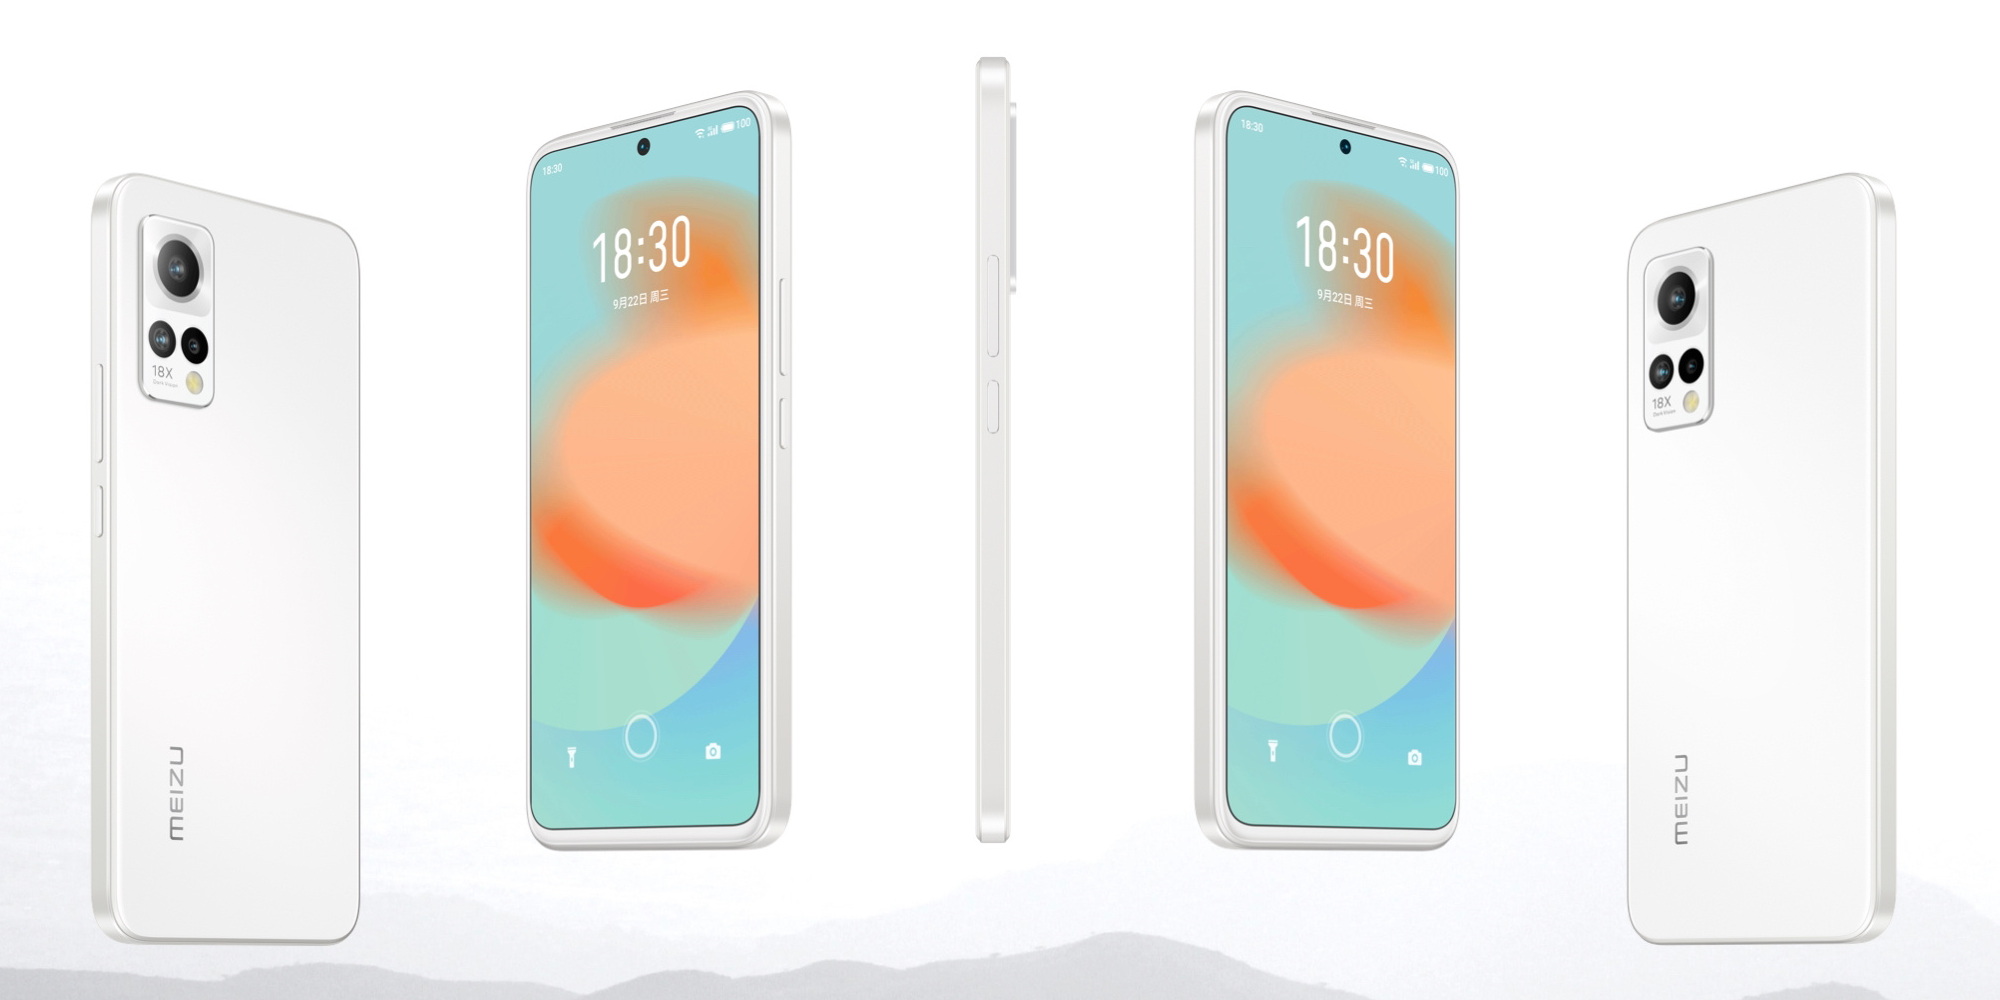 Never before seen in 2021: A unique version of Meizu 18X Zen goes on sale for $470